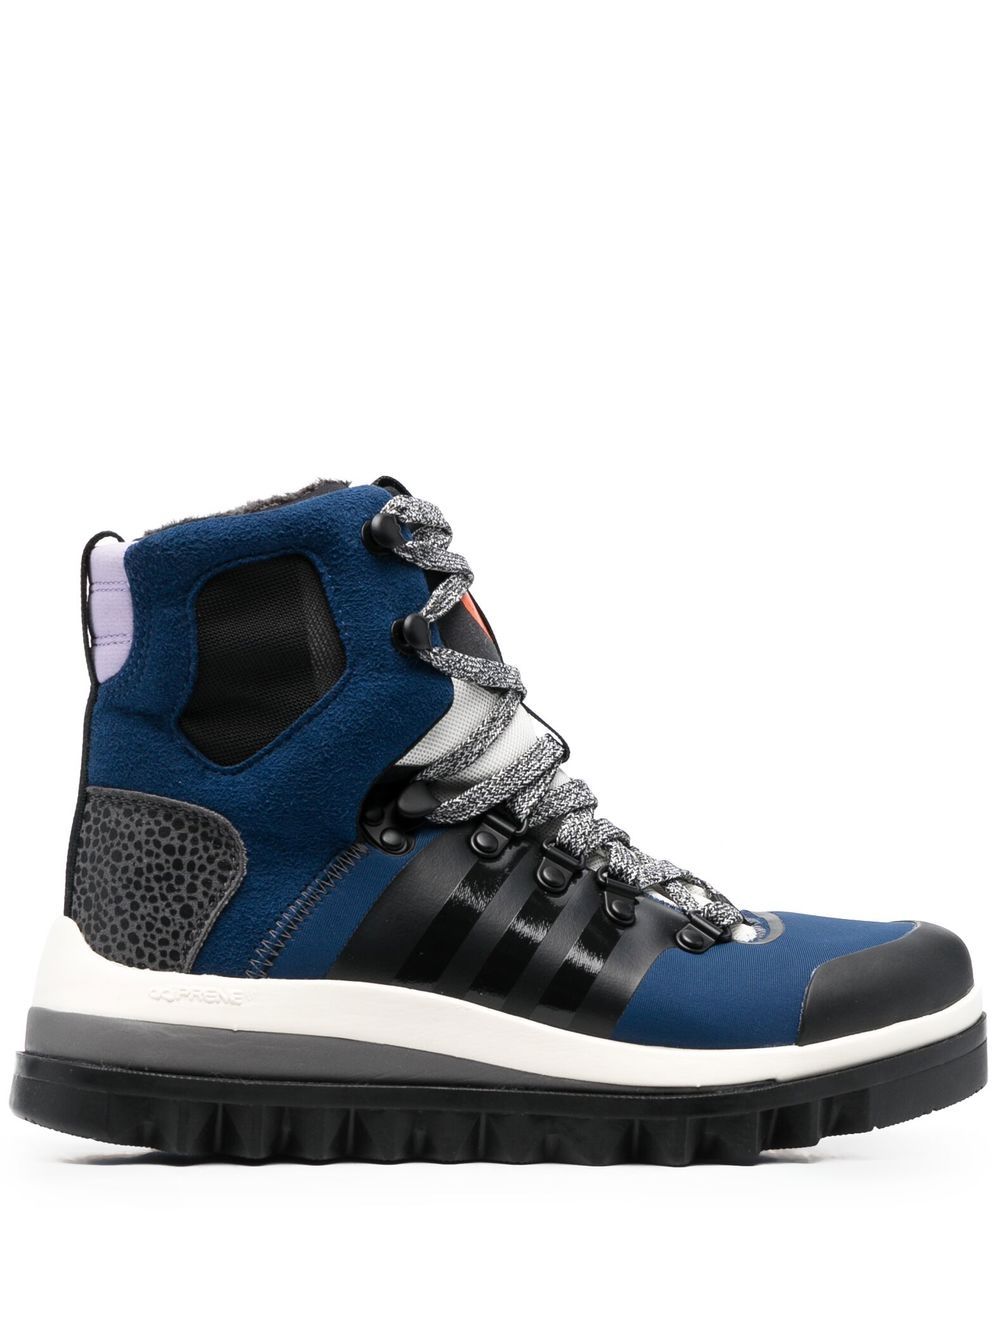 adidas by Stella McCartney hi-top contrast lace sneakers - Blue